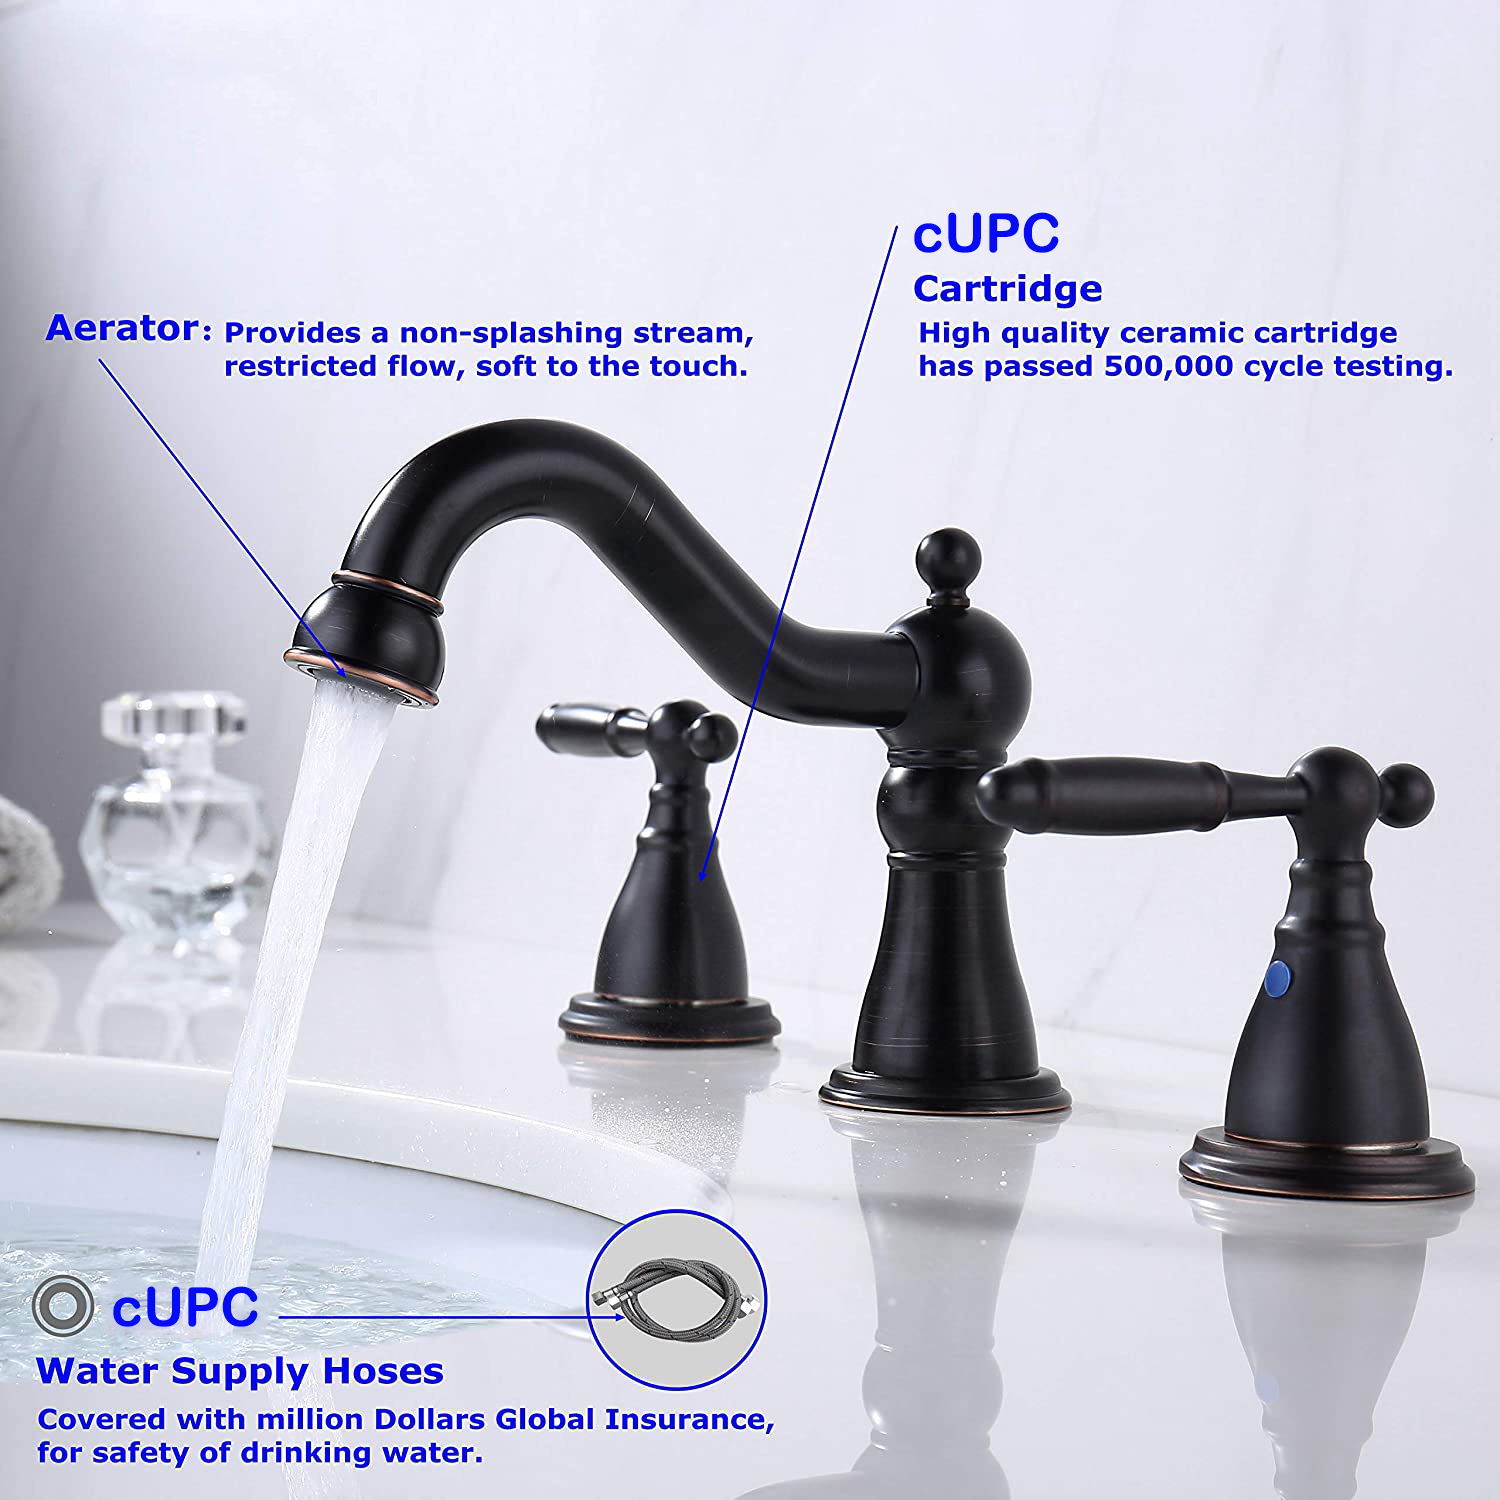 Aquacubic Modern Lavatory Sink Faucet 3 Holes 8 Inch Widespread Assembly ORB Bathroom Basin Faucet Taps